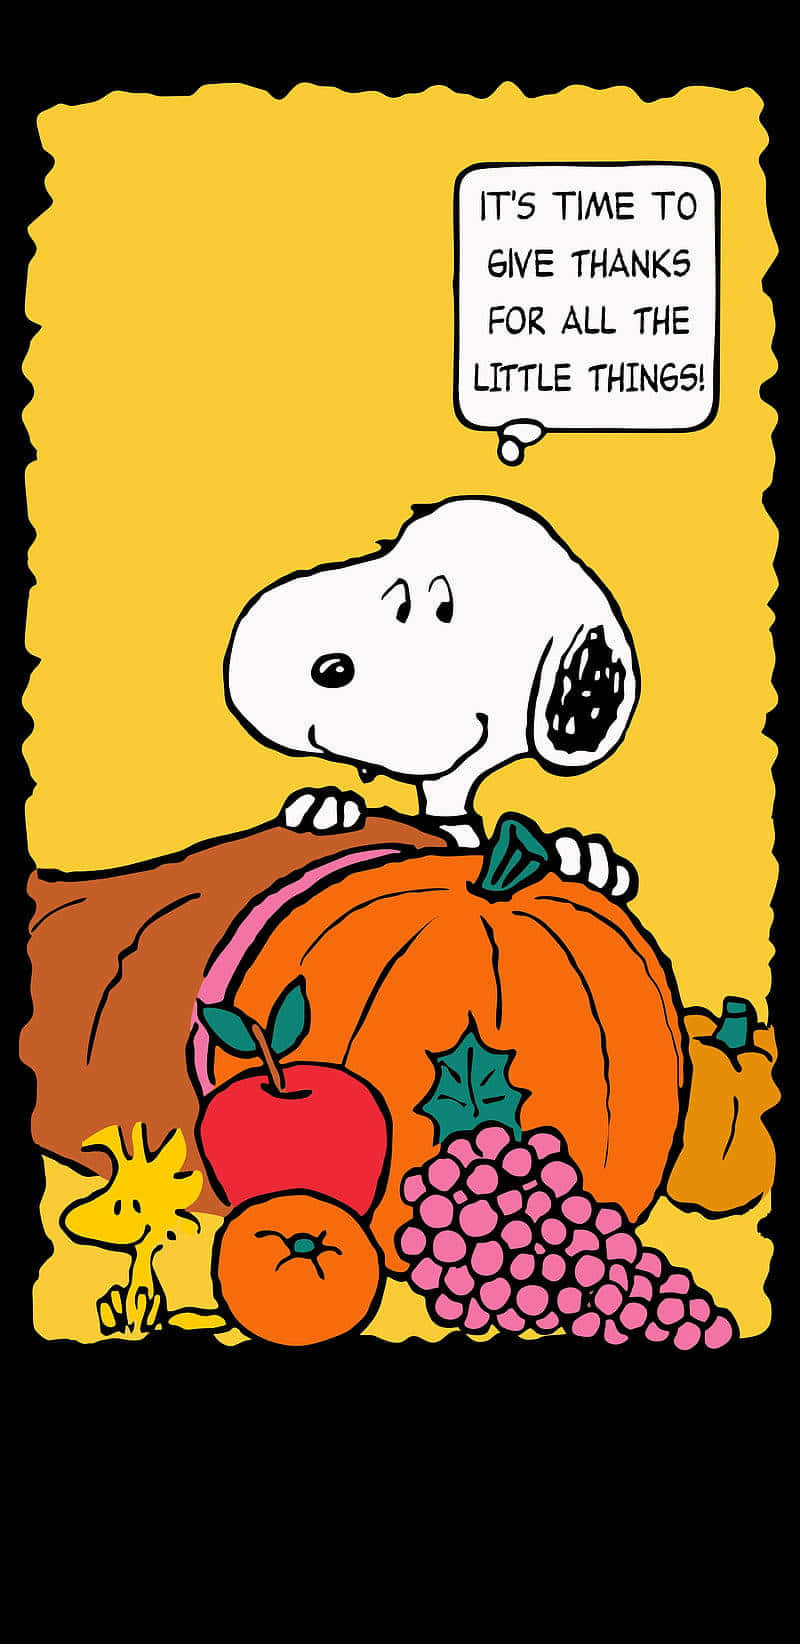 Happy Thanksgiving From Snoopy